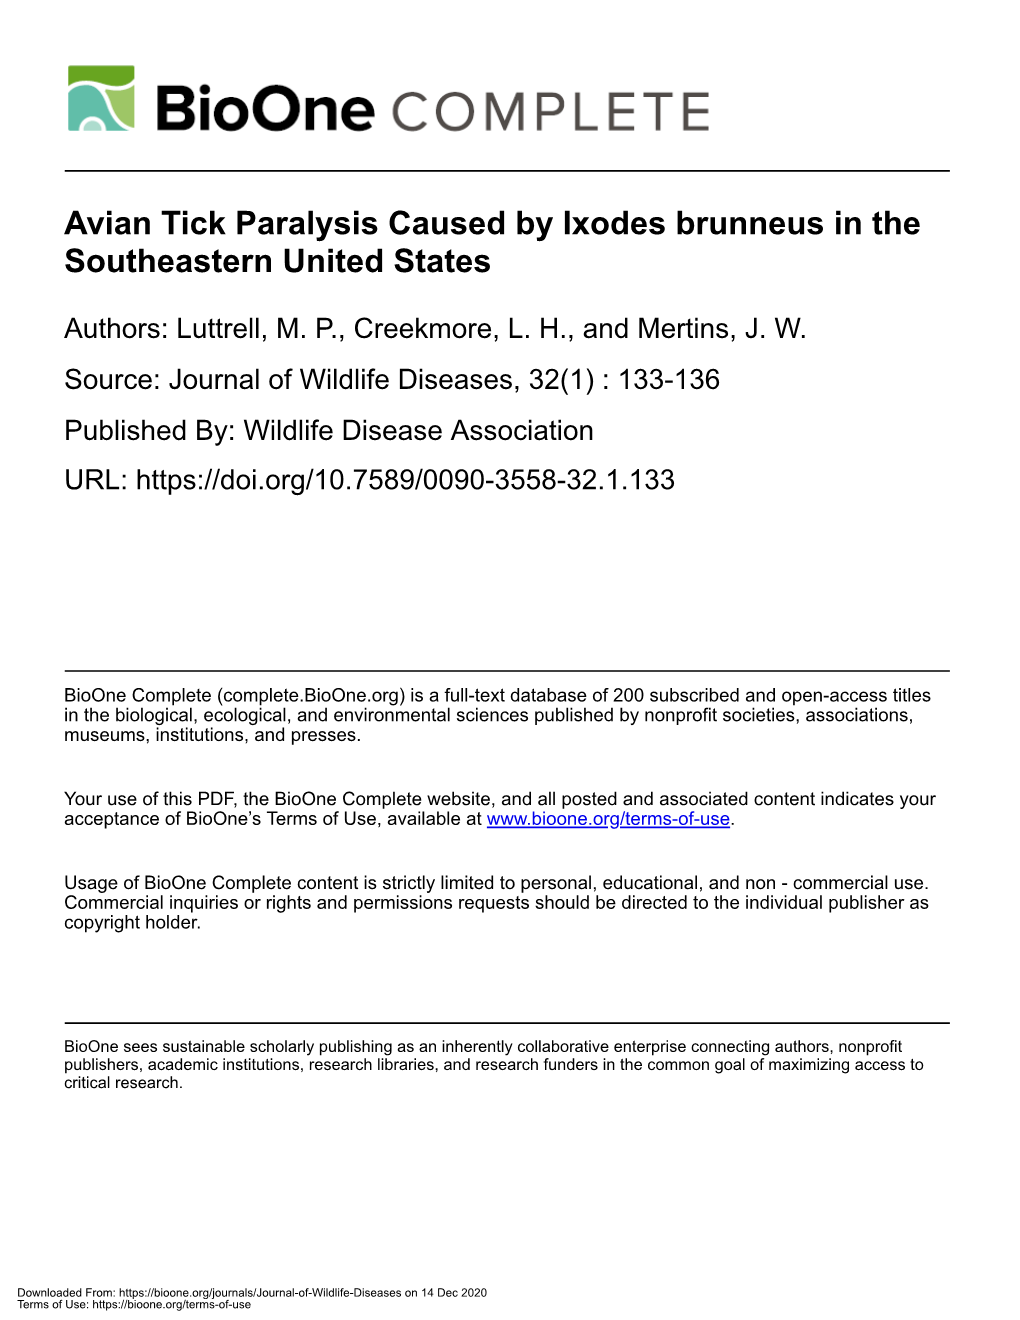 Avian Tick Paralysis Caused by Ixodes Brunneus in the Southeastern United States